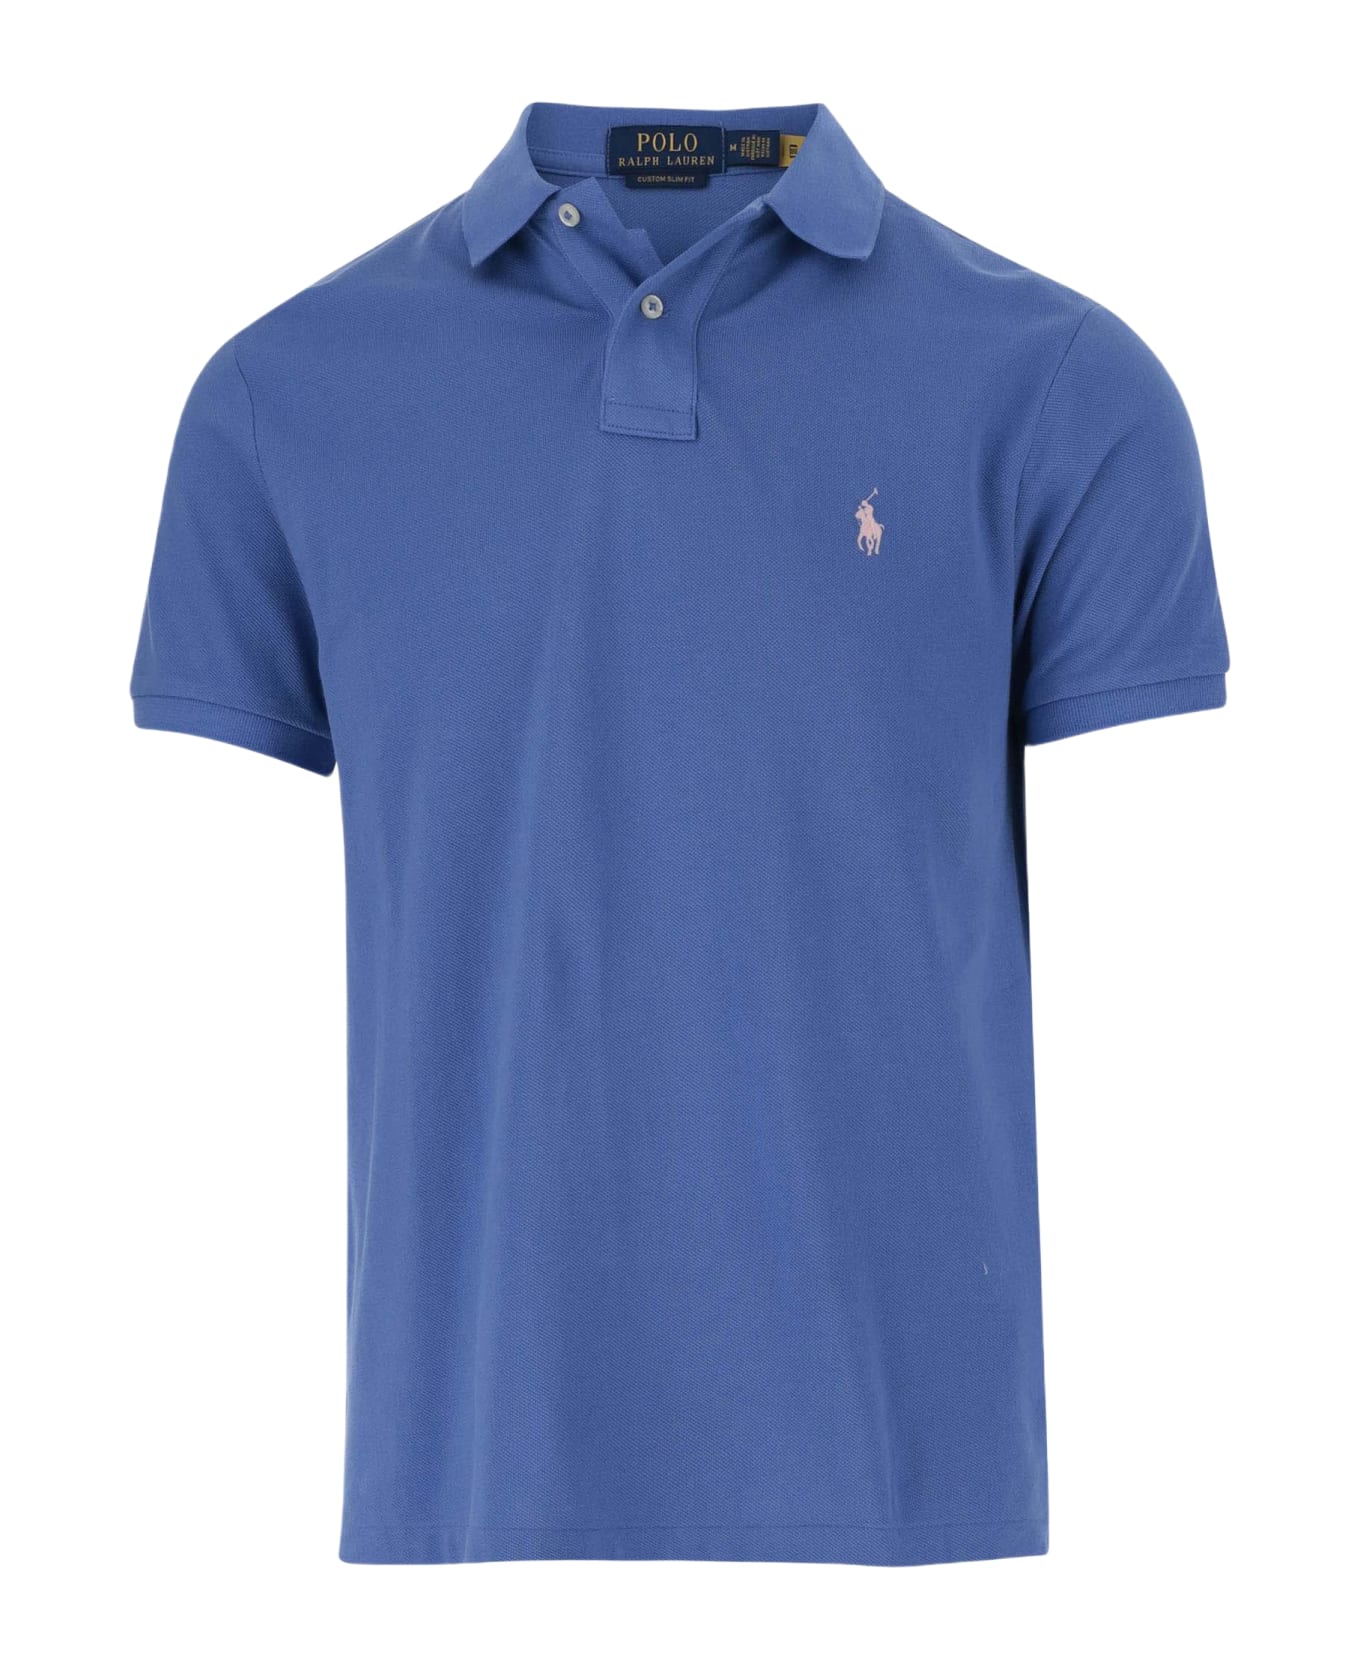 Ralph Lauren Pony Embroidered Polo Shirt - Blue